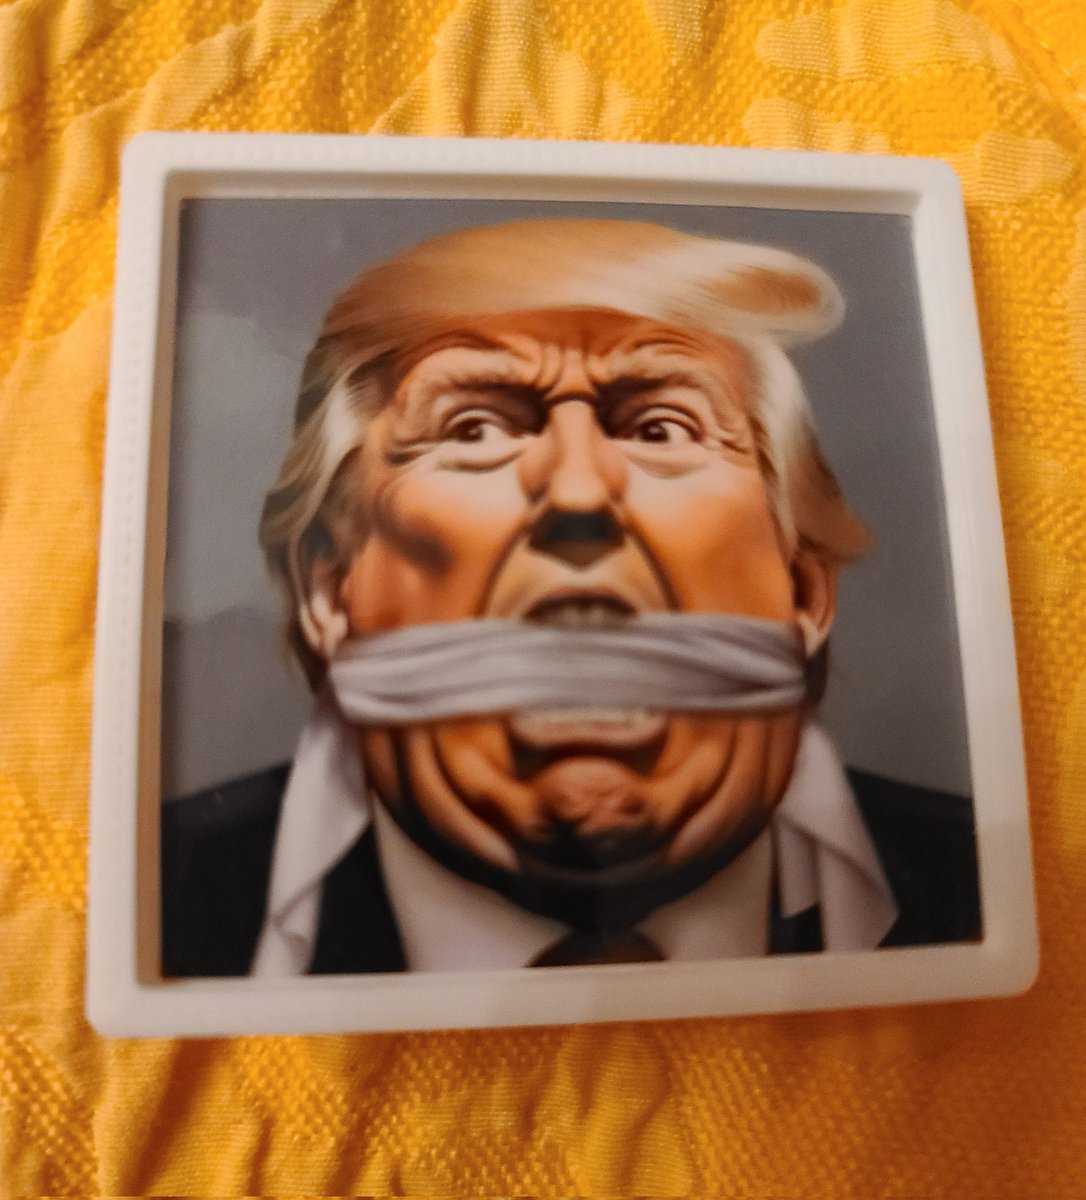 And here is @JillWineBanks’ #JillsPin for this week - Trump must be gagged. We talk about this and more with our guest this week, Jon Sales. It’s an episode worth watching or listening. He offers a great perspective into all of Trump’s cases & why he is doing himself no favors.